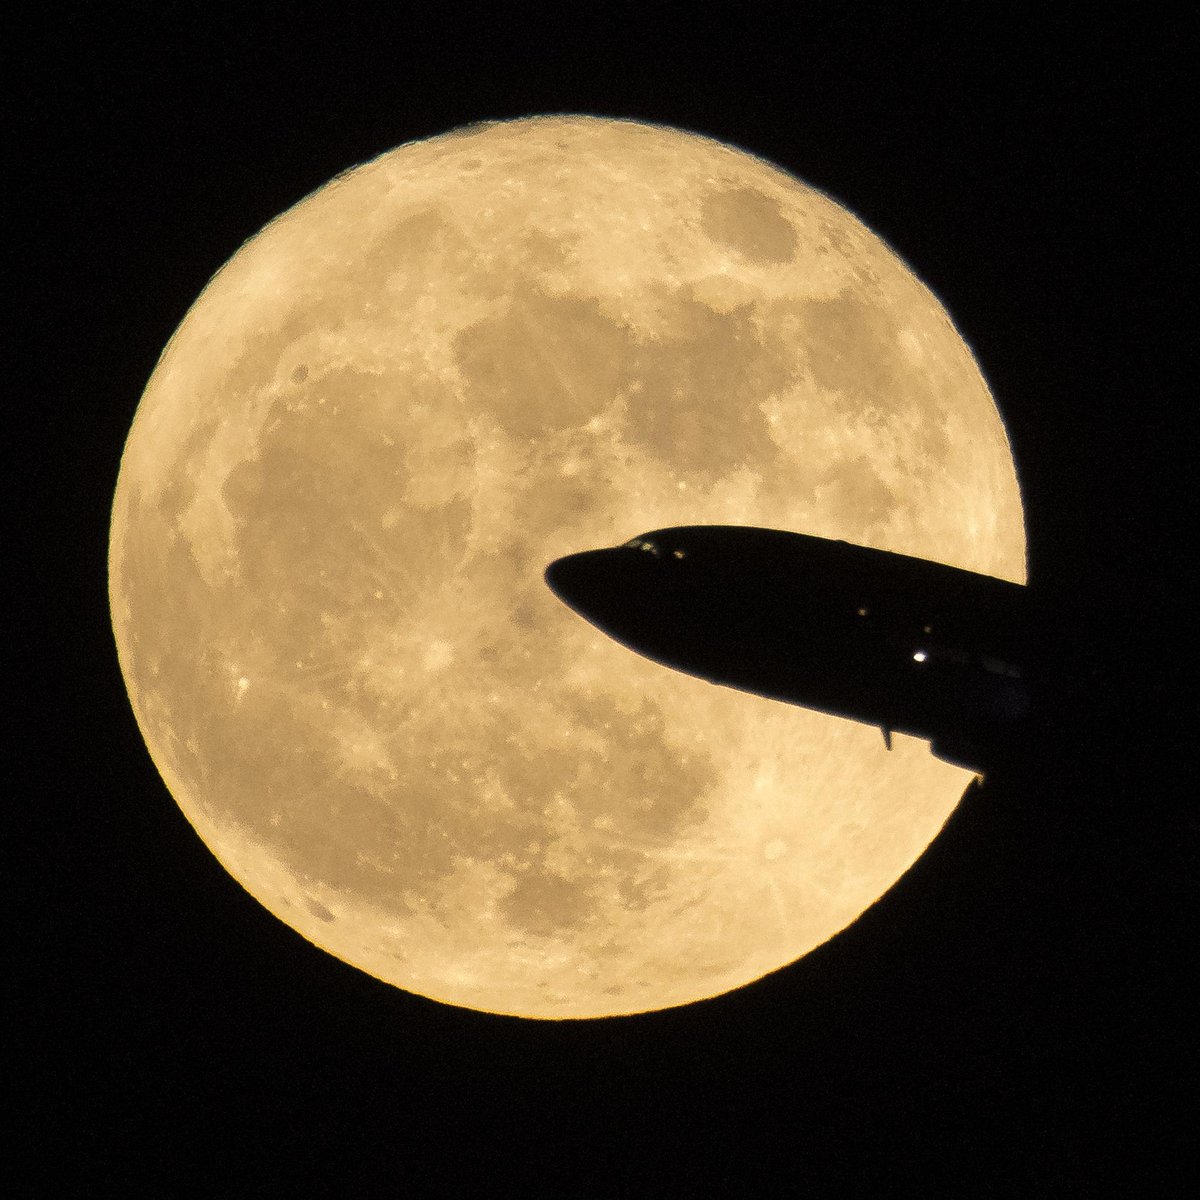 It’s a bird! It’s a plane! It’s a supermoon! A supermoon occurs when a full moon occurs near the Moon’s closest point to Earth in its monthly orbit. Catch the next one now through Thursday, Aug. 3, and reply with your favorite photos.